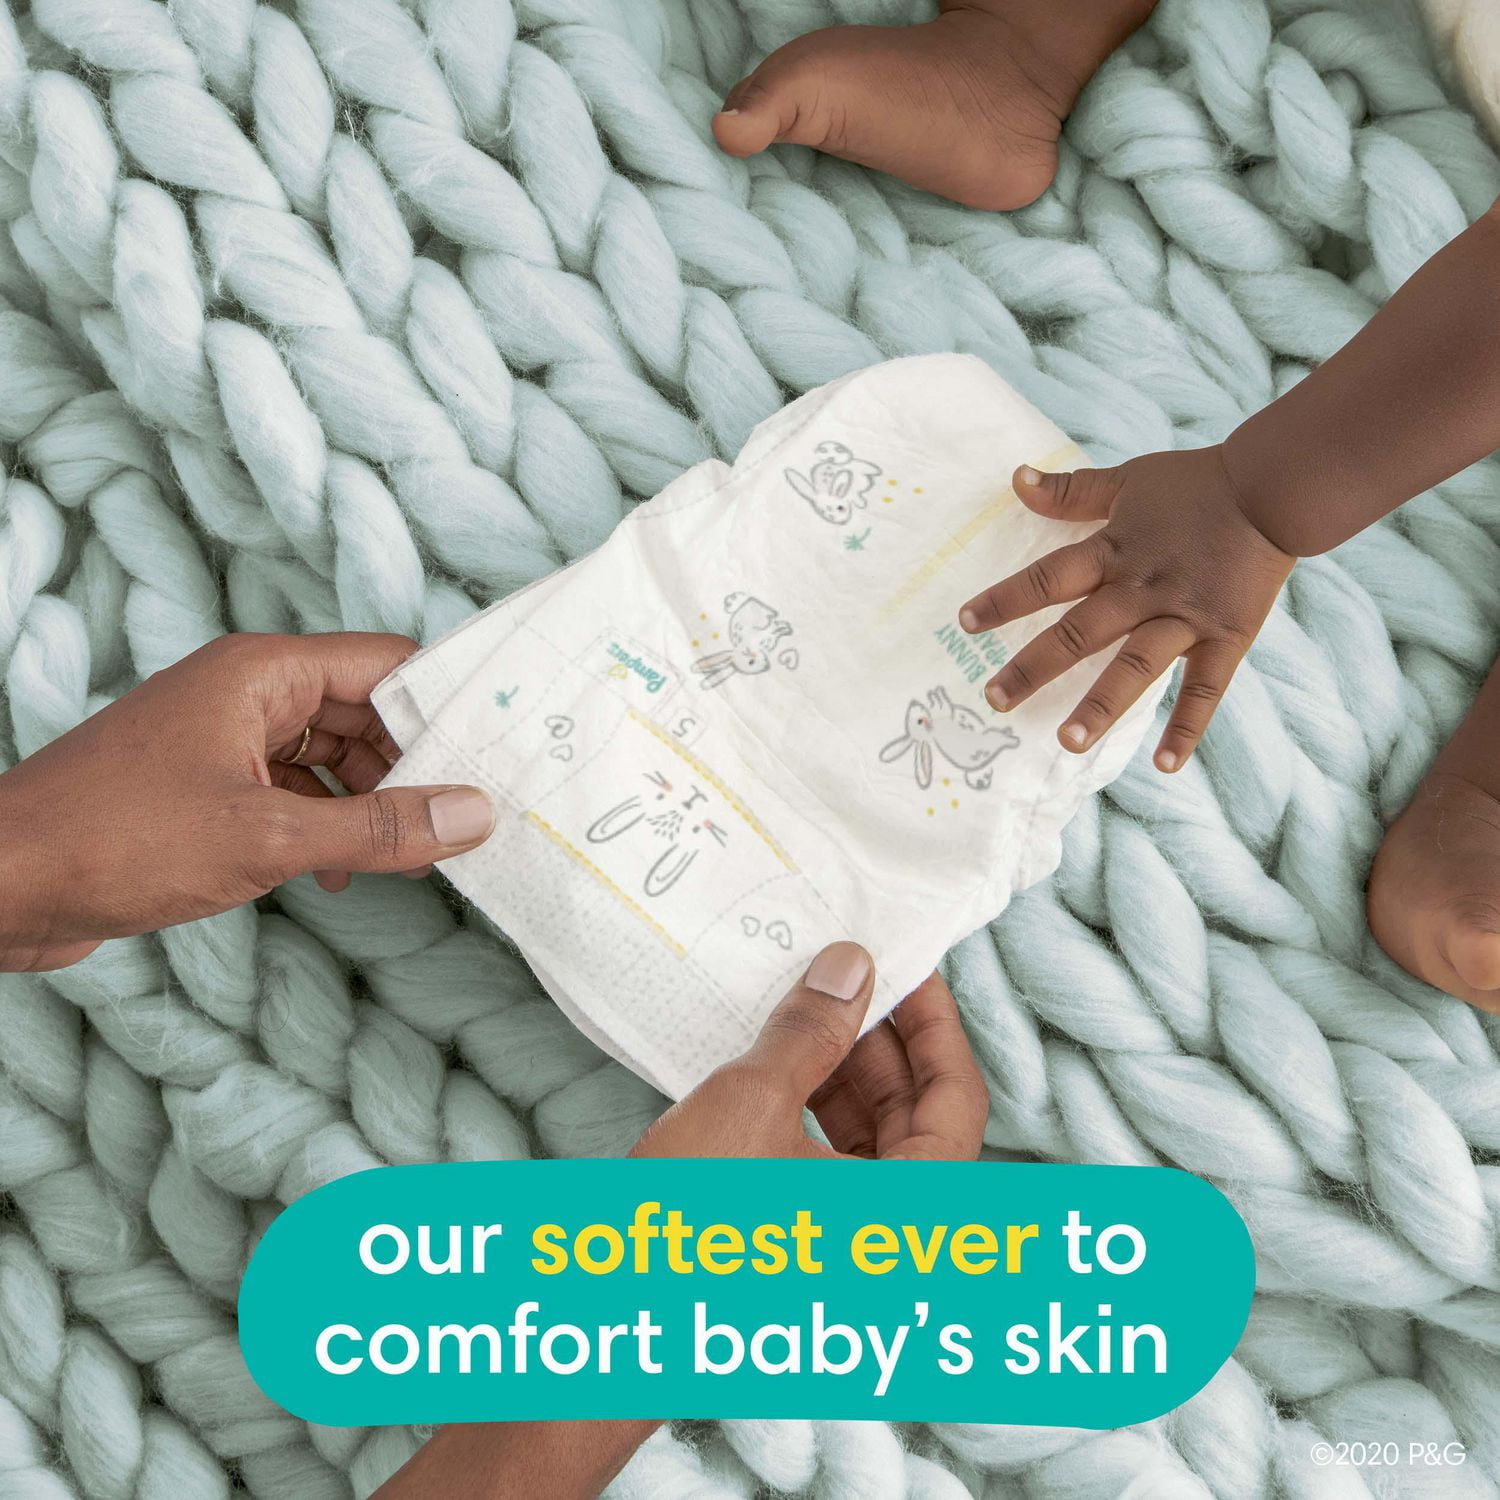 Review: Pampers Swaddlers Diapers - Today's Parent